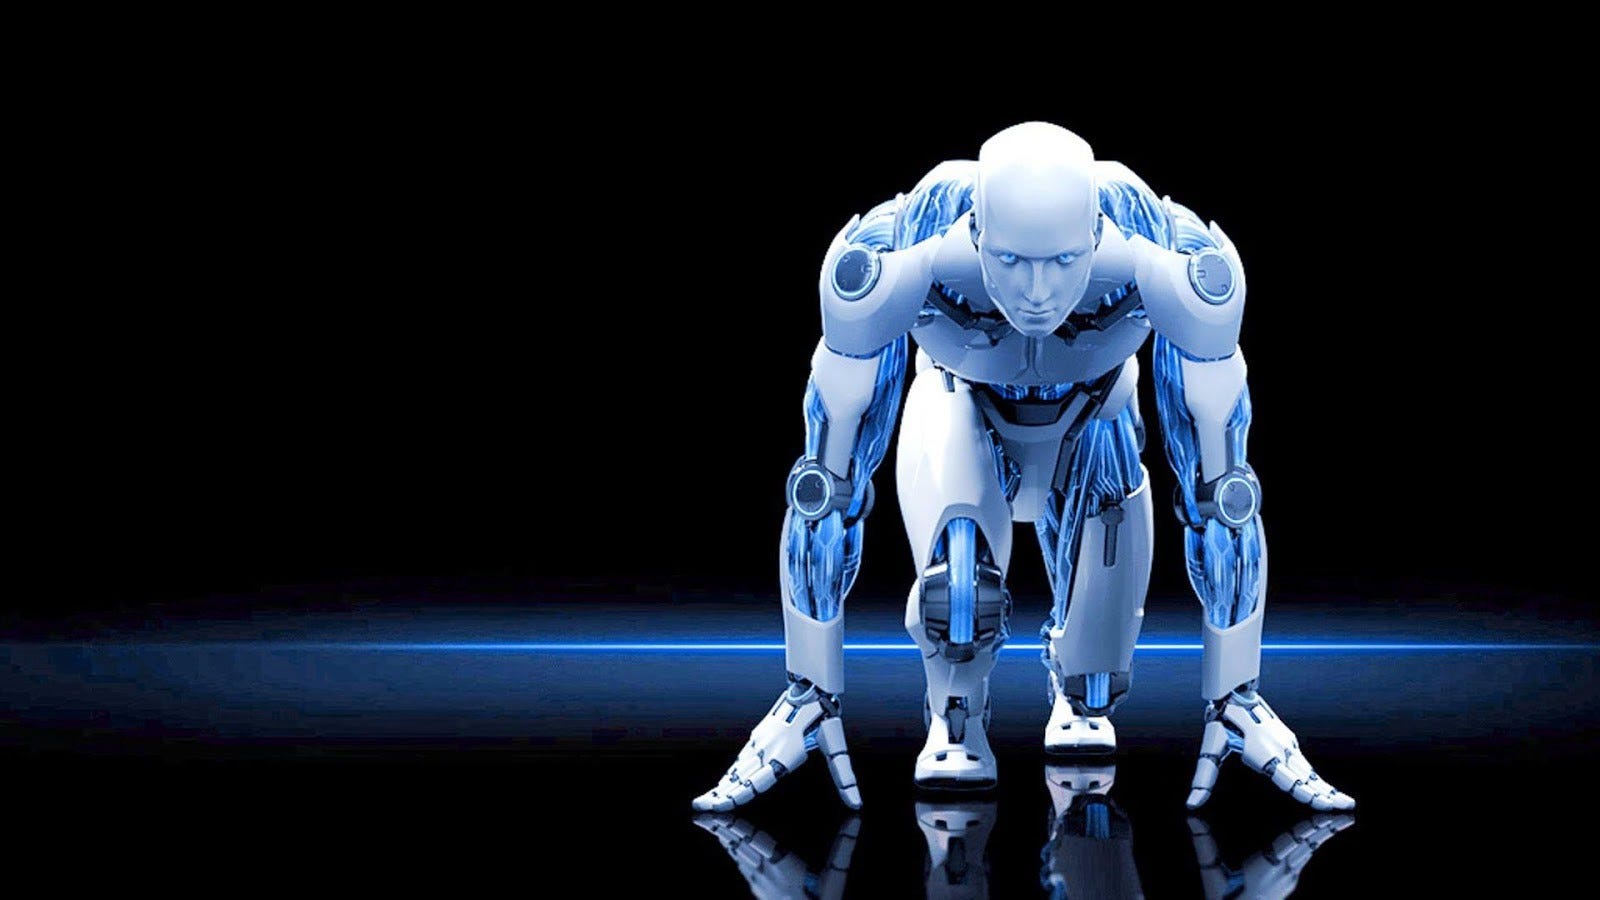 Robot hd wallpapers, hd images, backgrounds